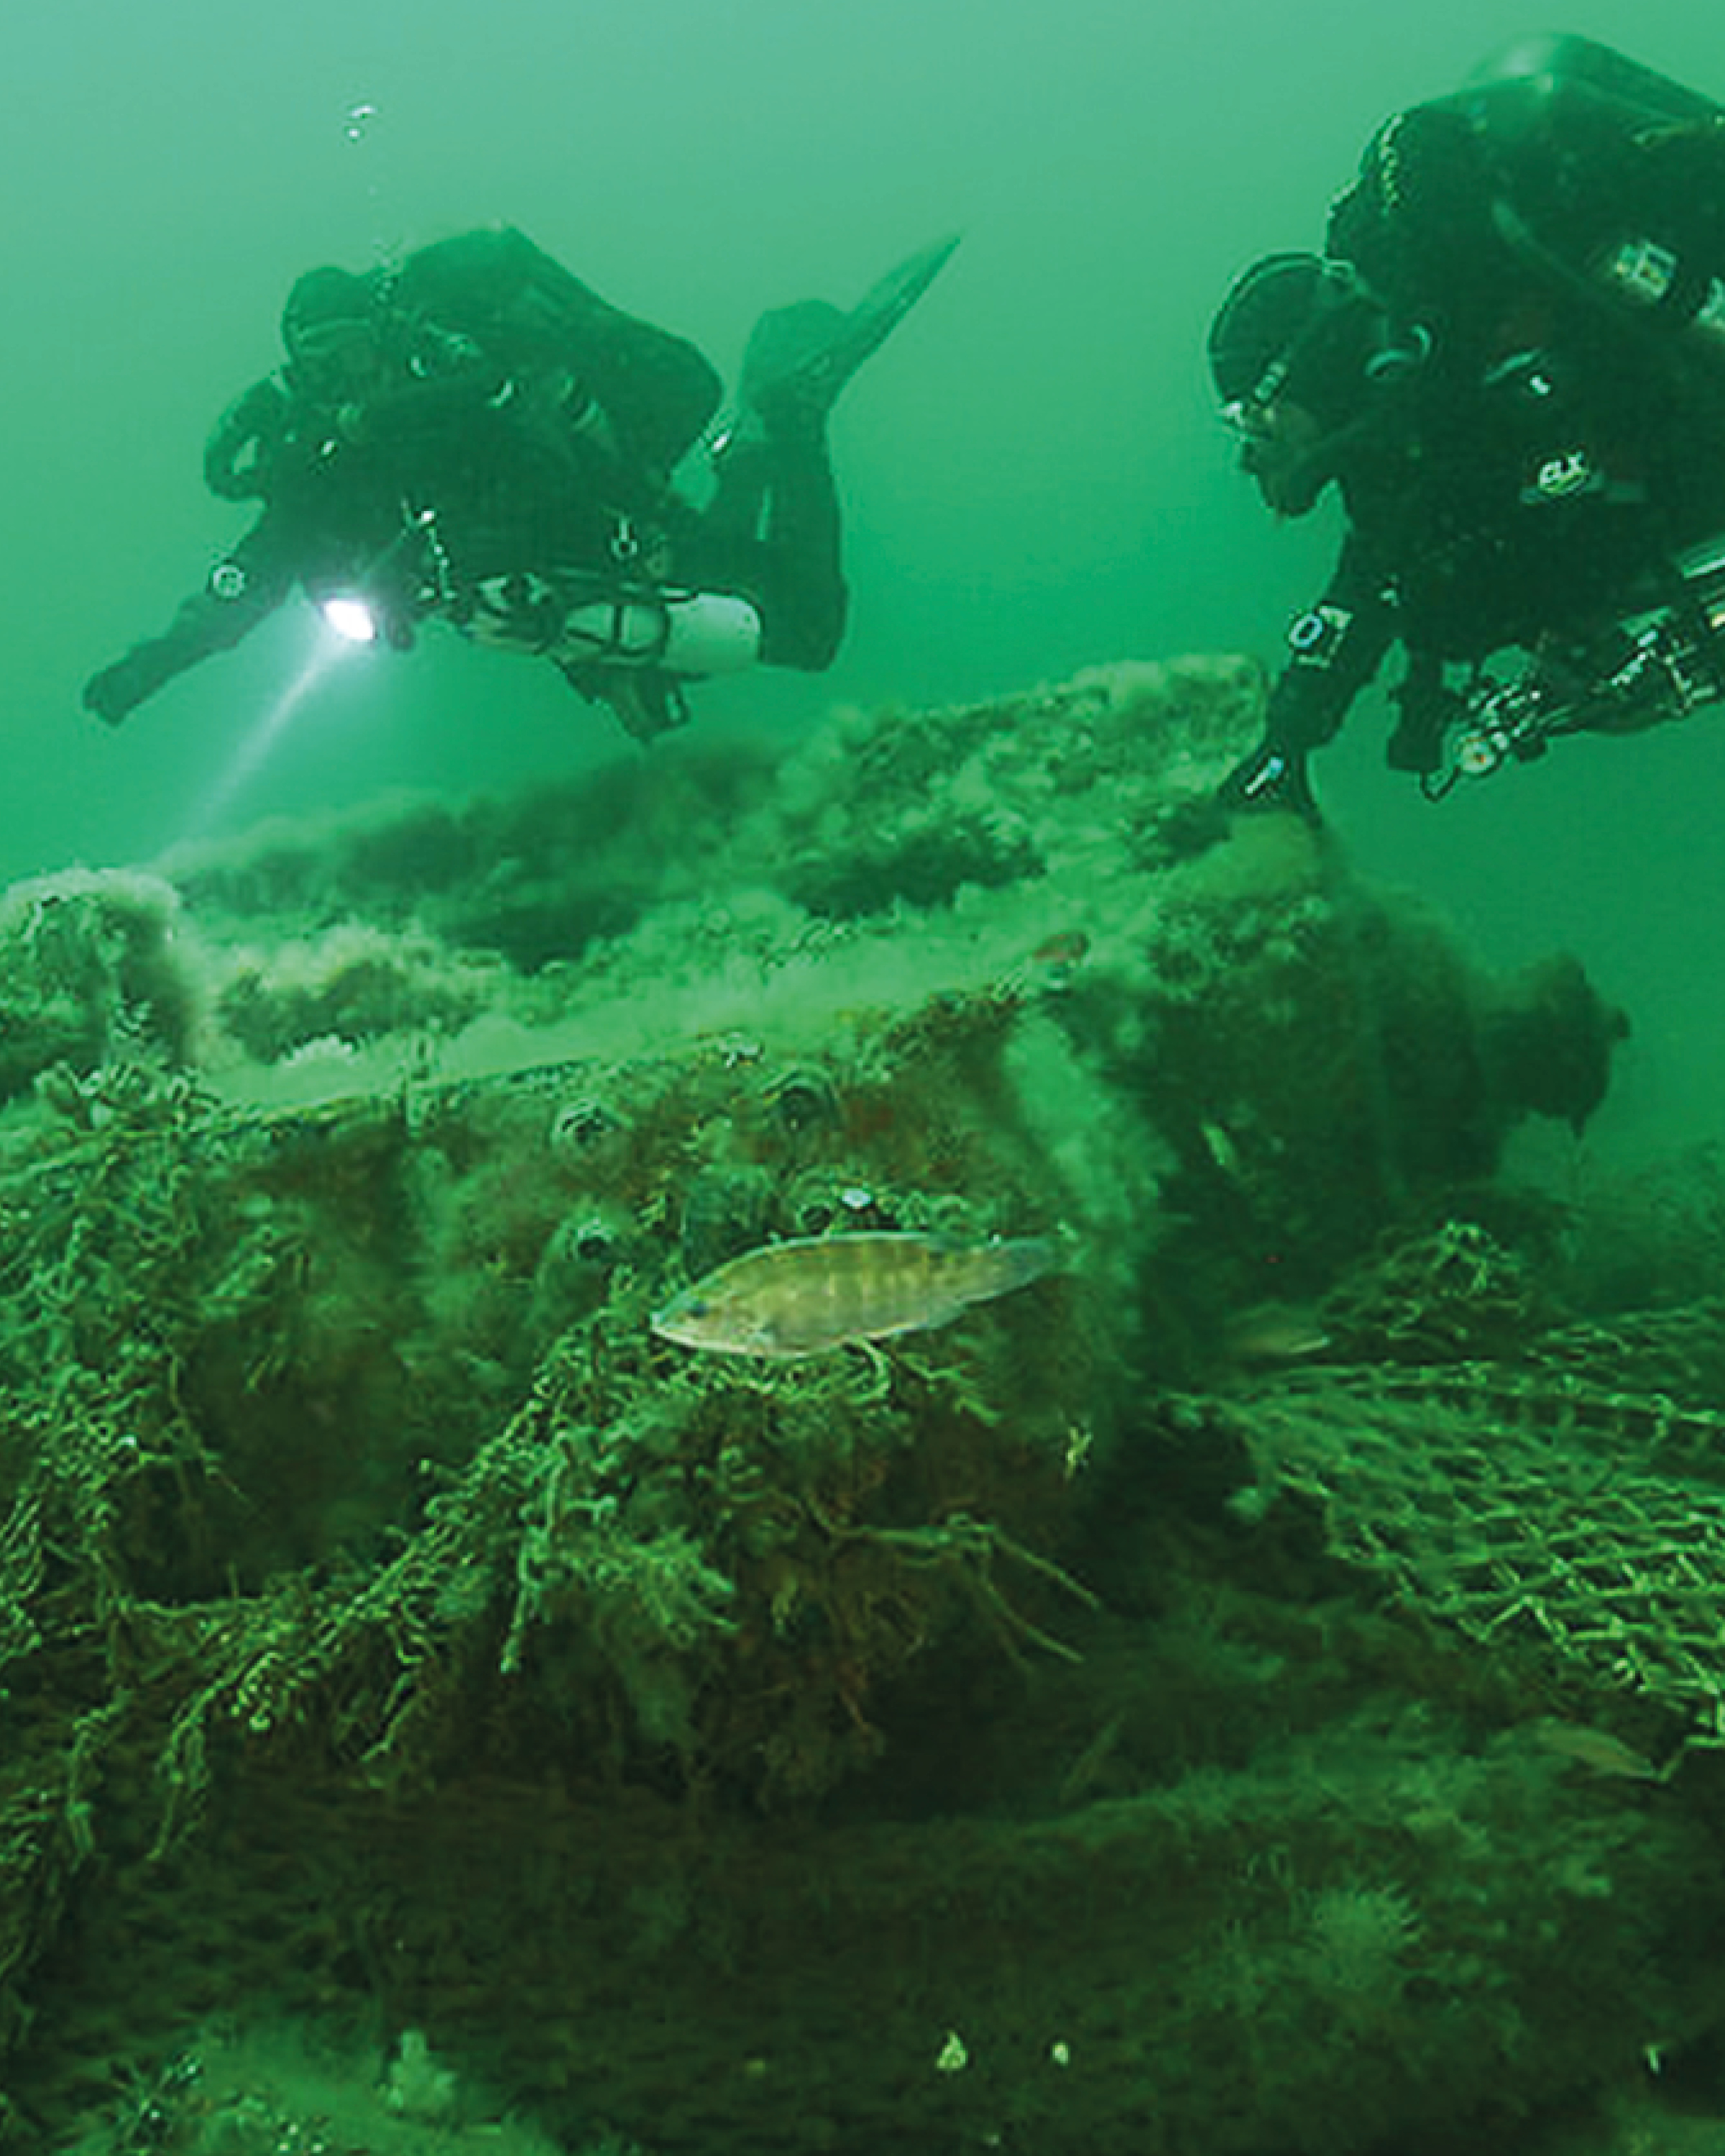 A diver examines debris left from fishing gear in the Stellwagen Bank Marine Sanctuary, a nationally protected area in the United States that allows trawling and fishing within its borders.